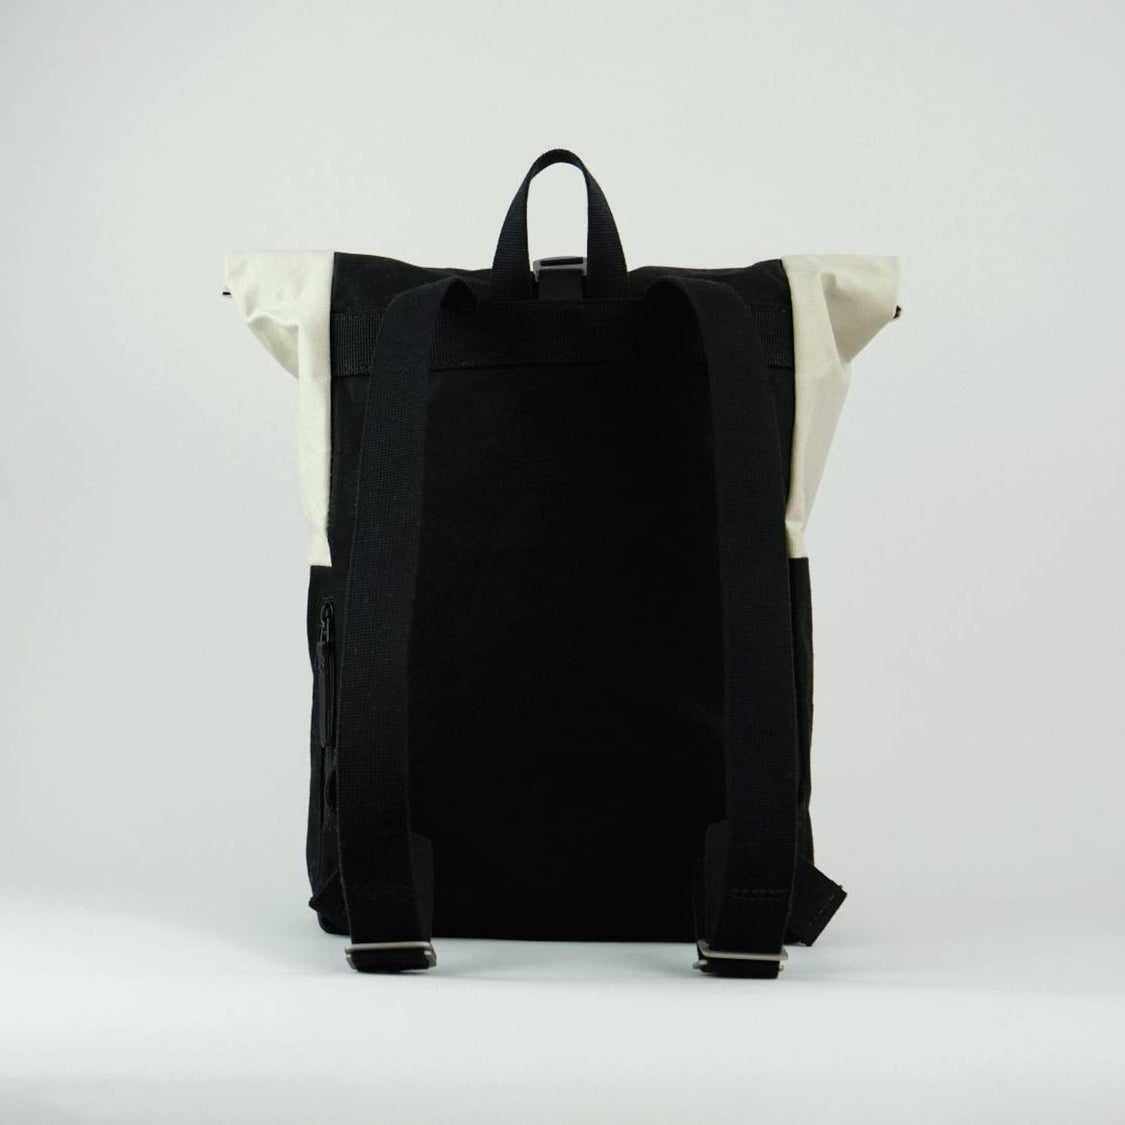 Rear view of Max the backpack. A rolltop backpack made of waxed canvas in chalk white and black.